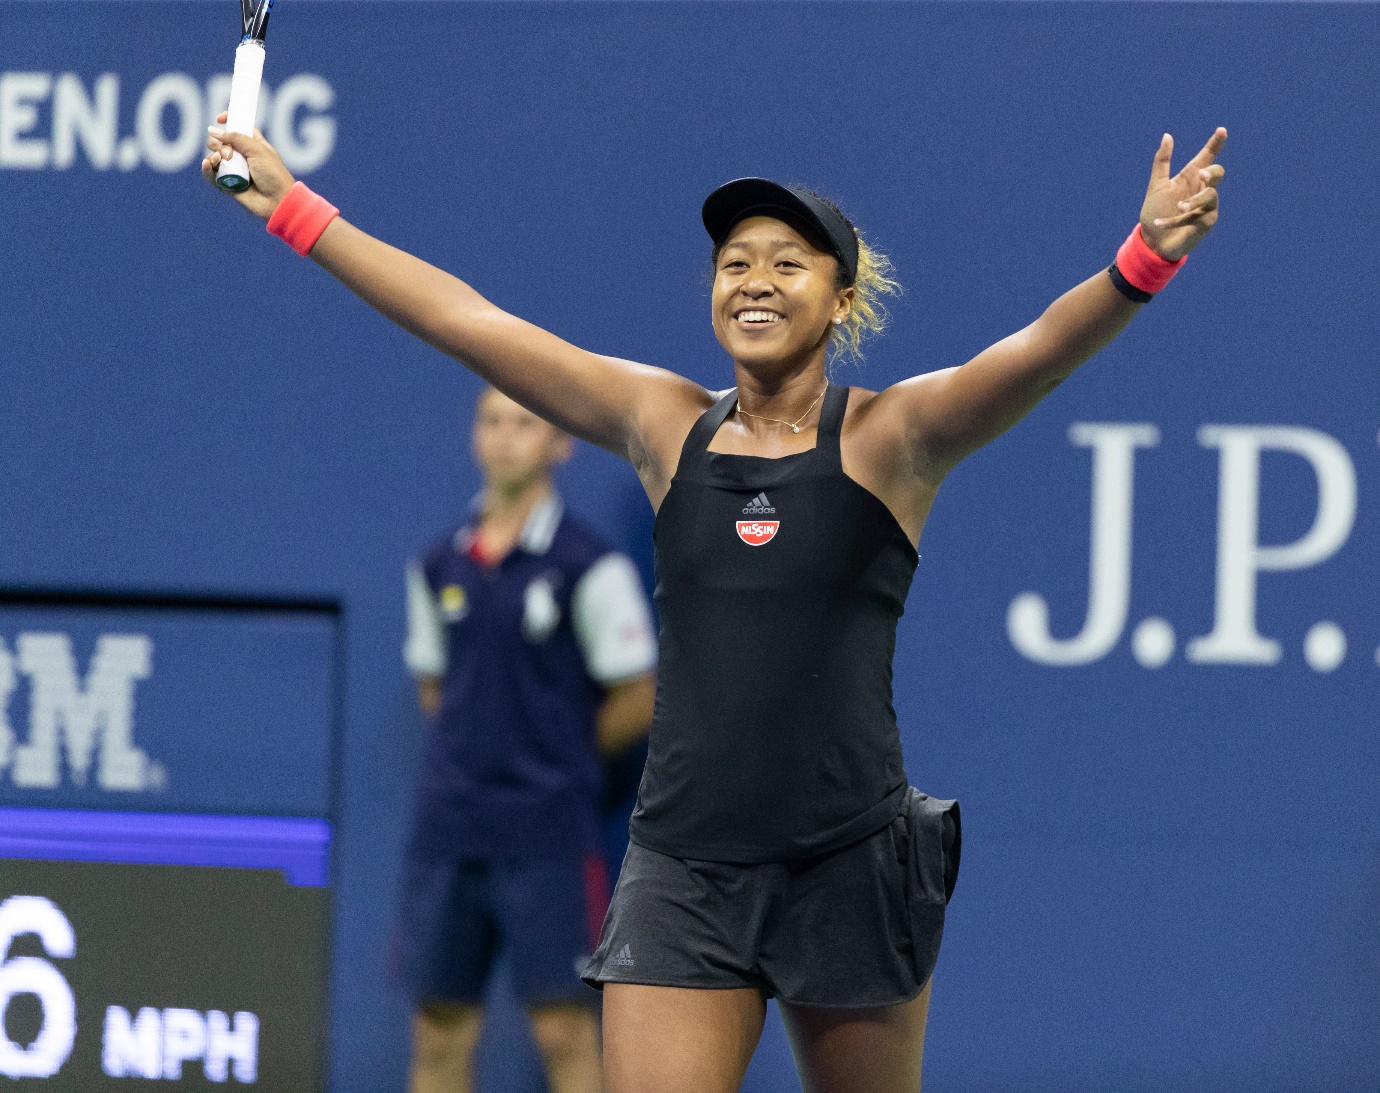 Can Naomi Osaka win her fourth Grand Slam title at the upcoming Australian Open